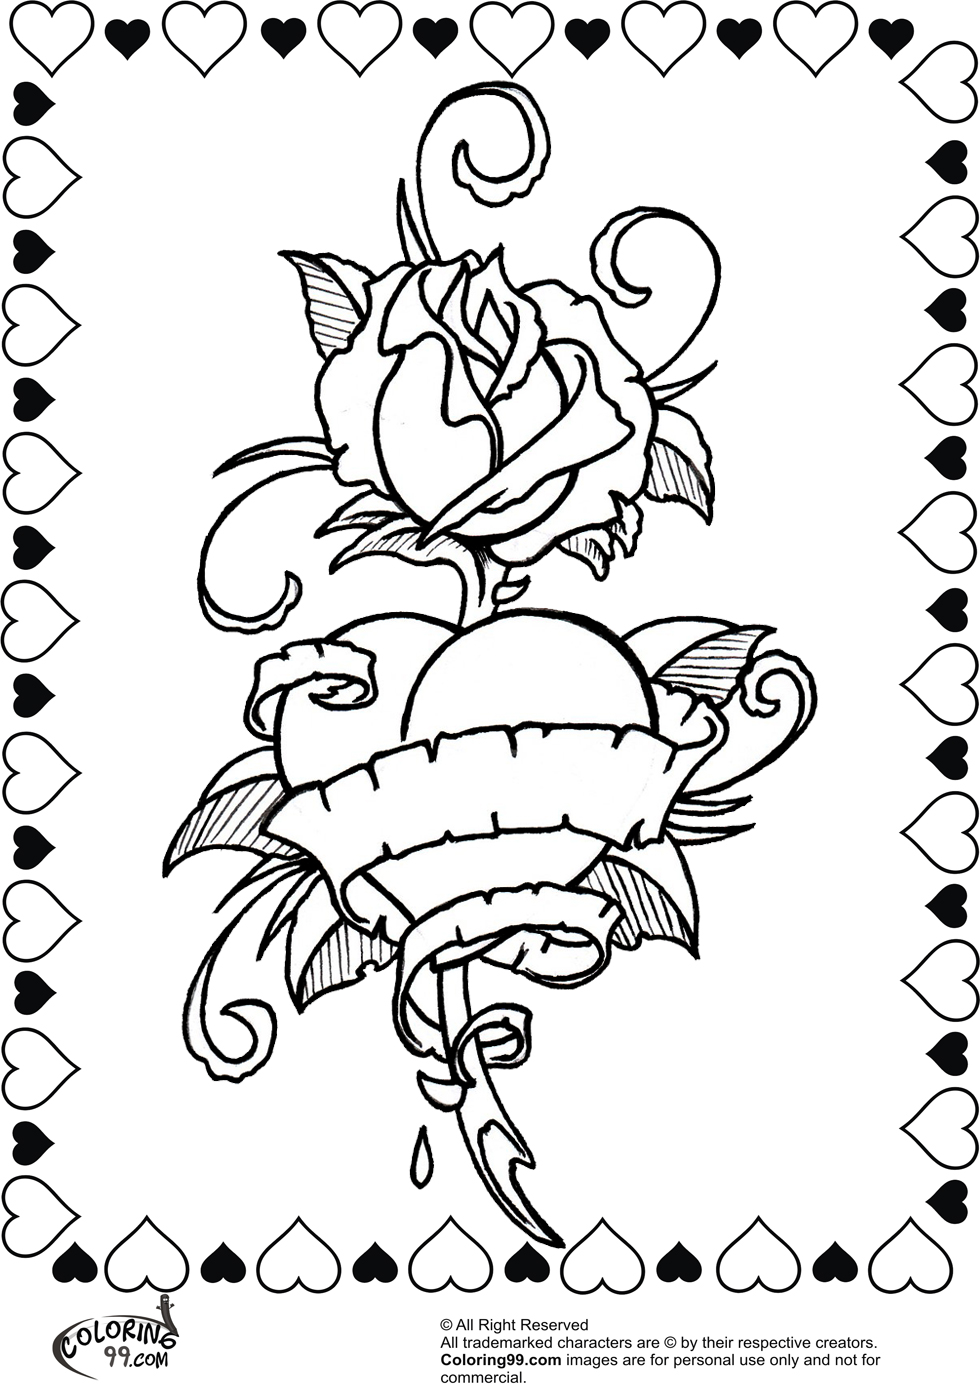 Coloring Pages with Hearts And Roses